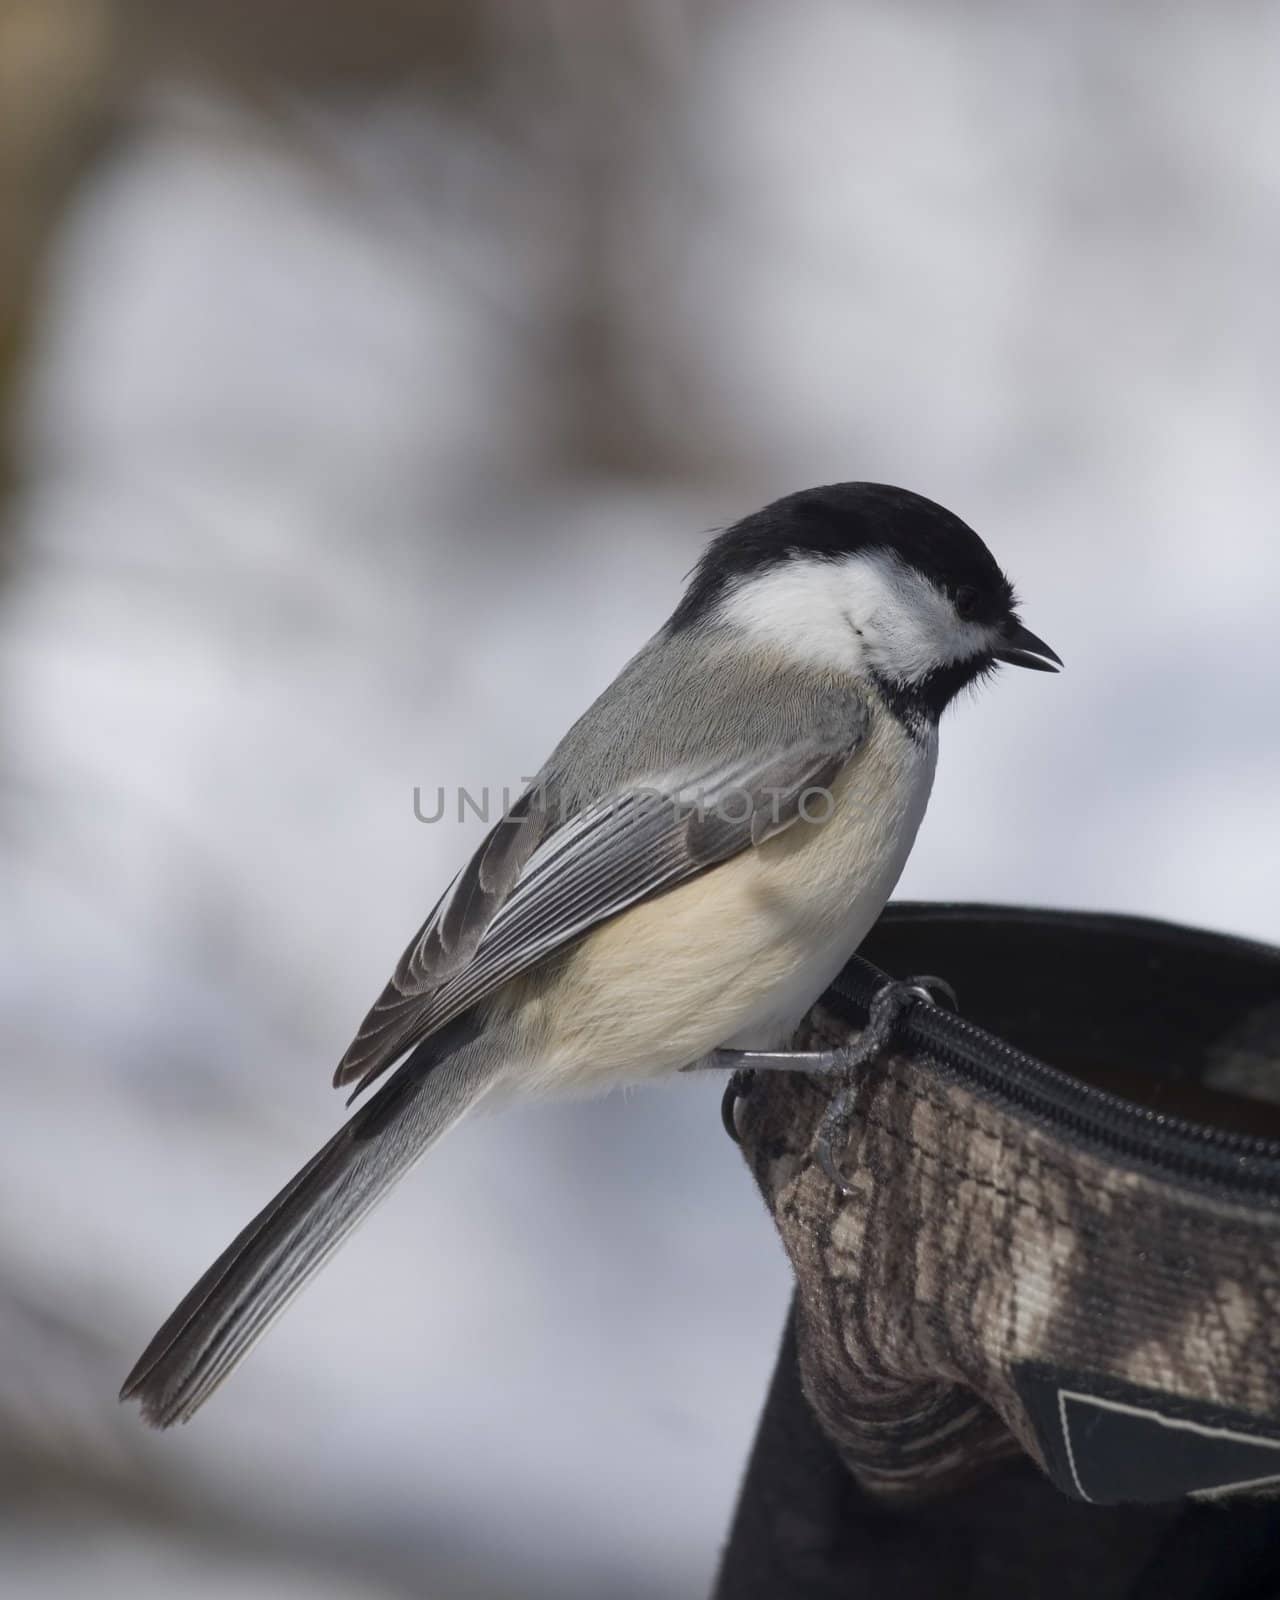 Black-capped chickadee perched on an open backpack.